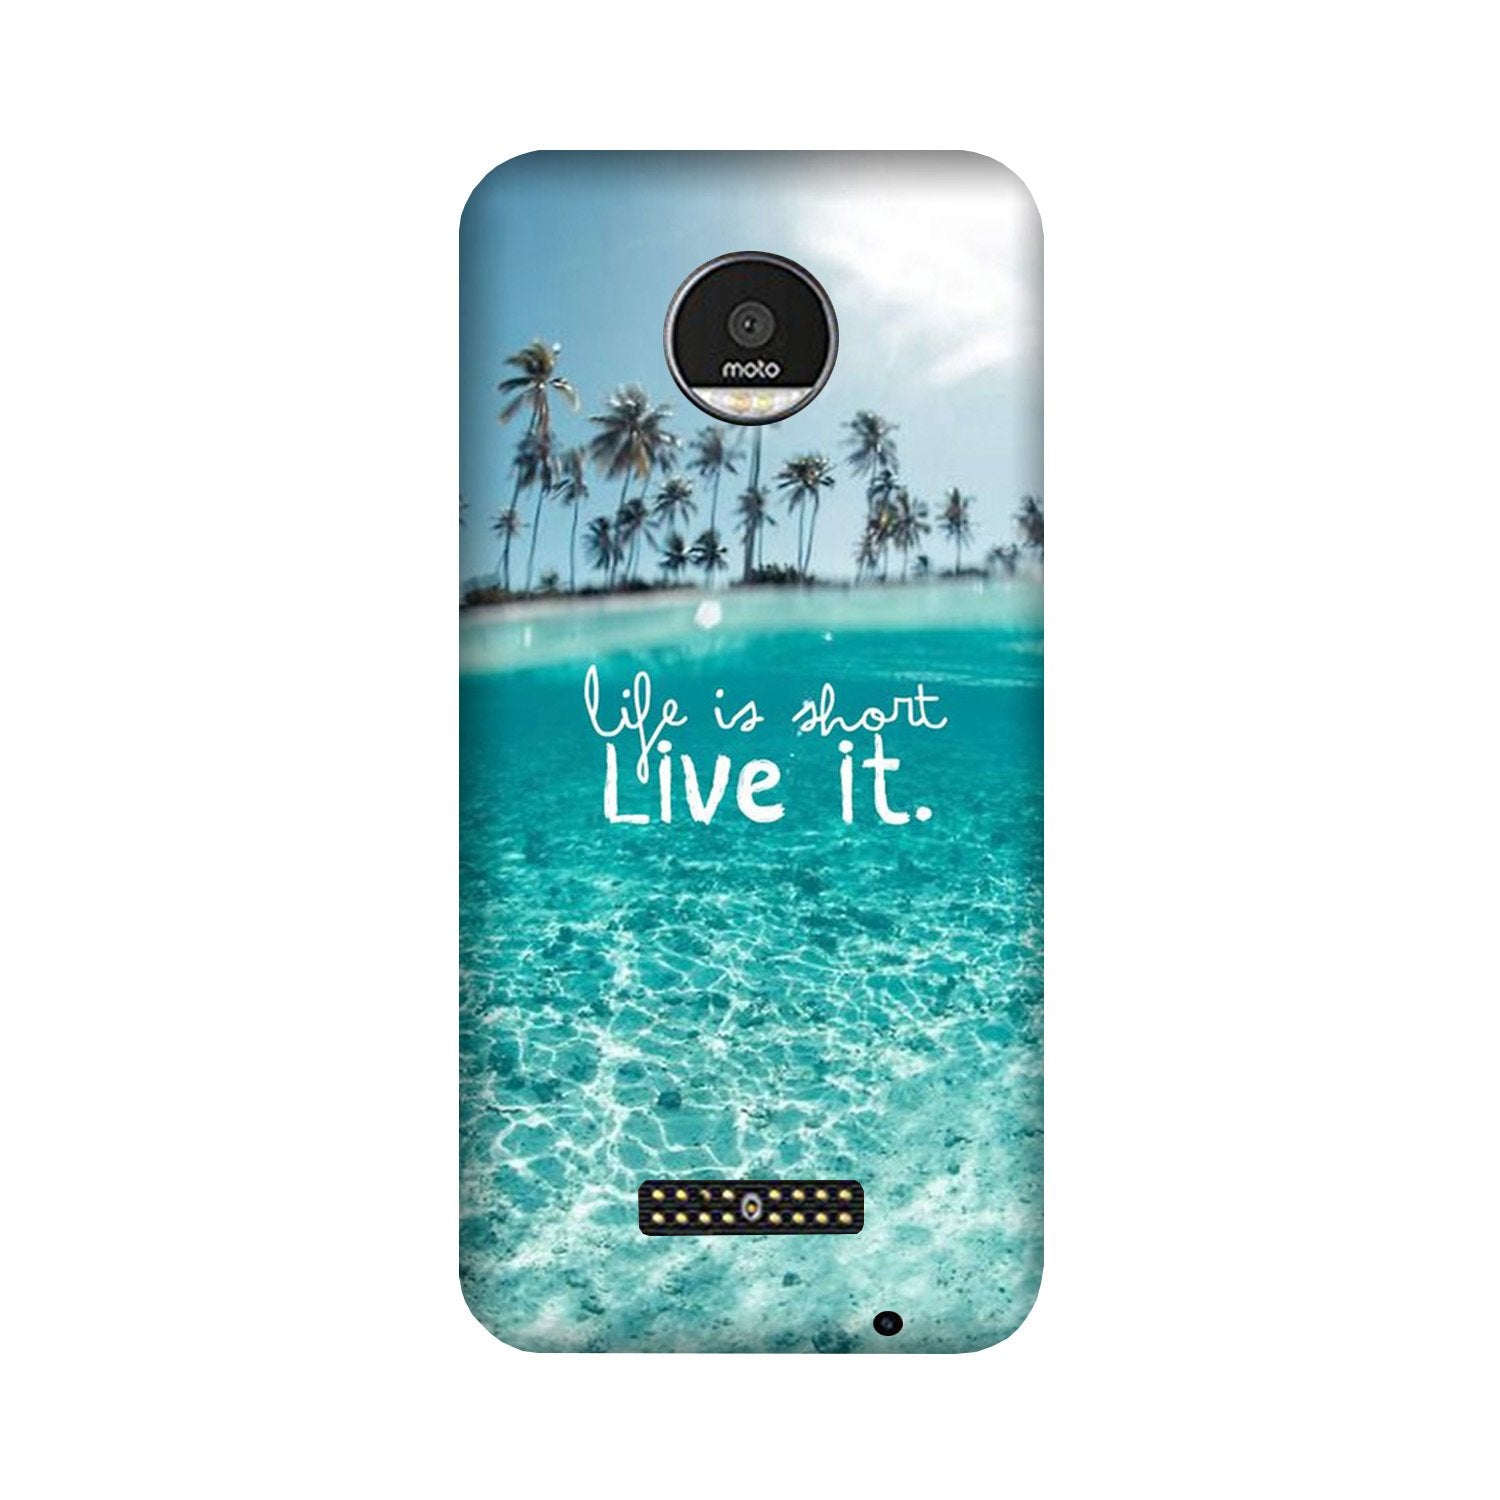 Life is short live it Case for Moto Z Play